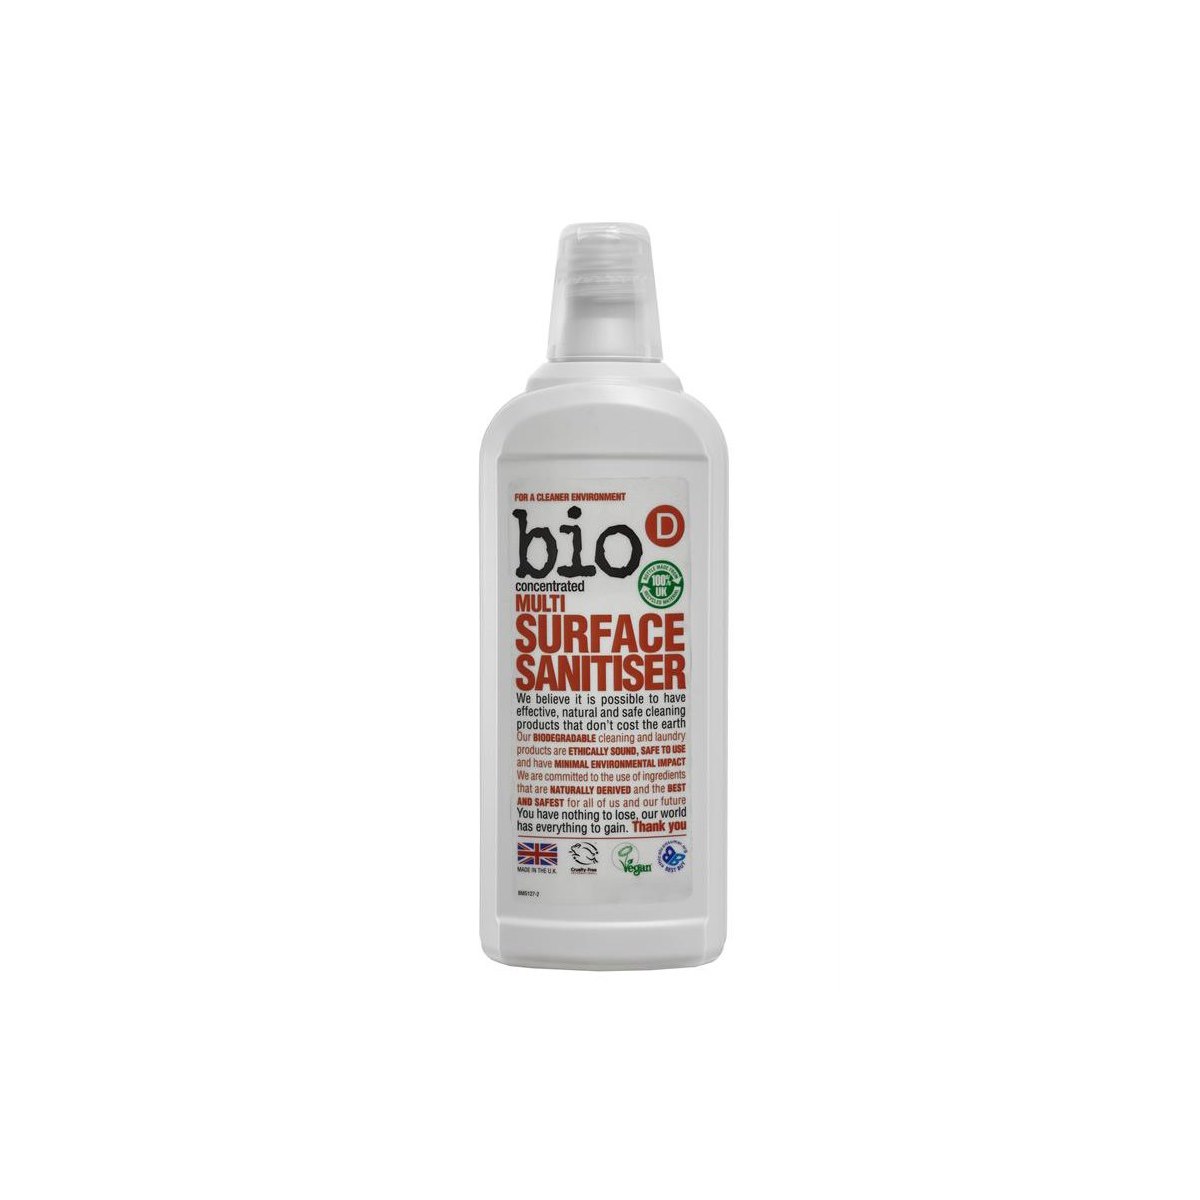 Bio D Concentrated Multi Surface Sanitiser 750ml